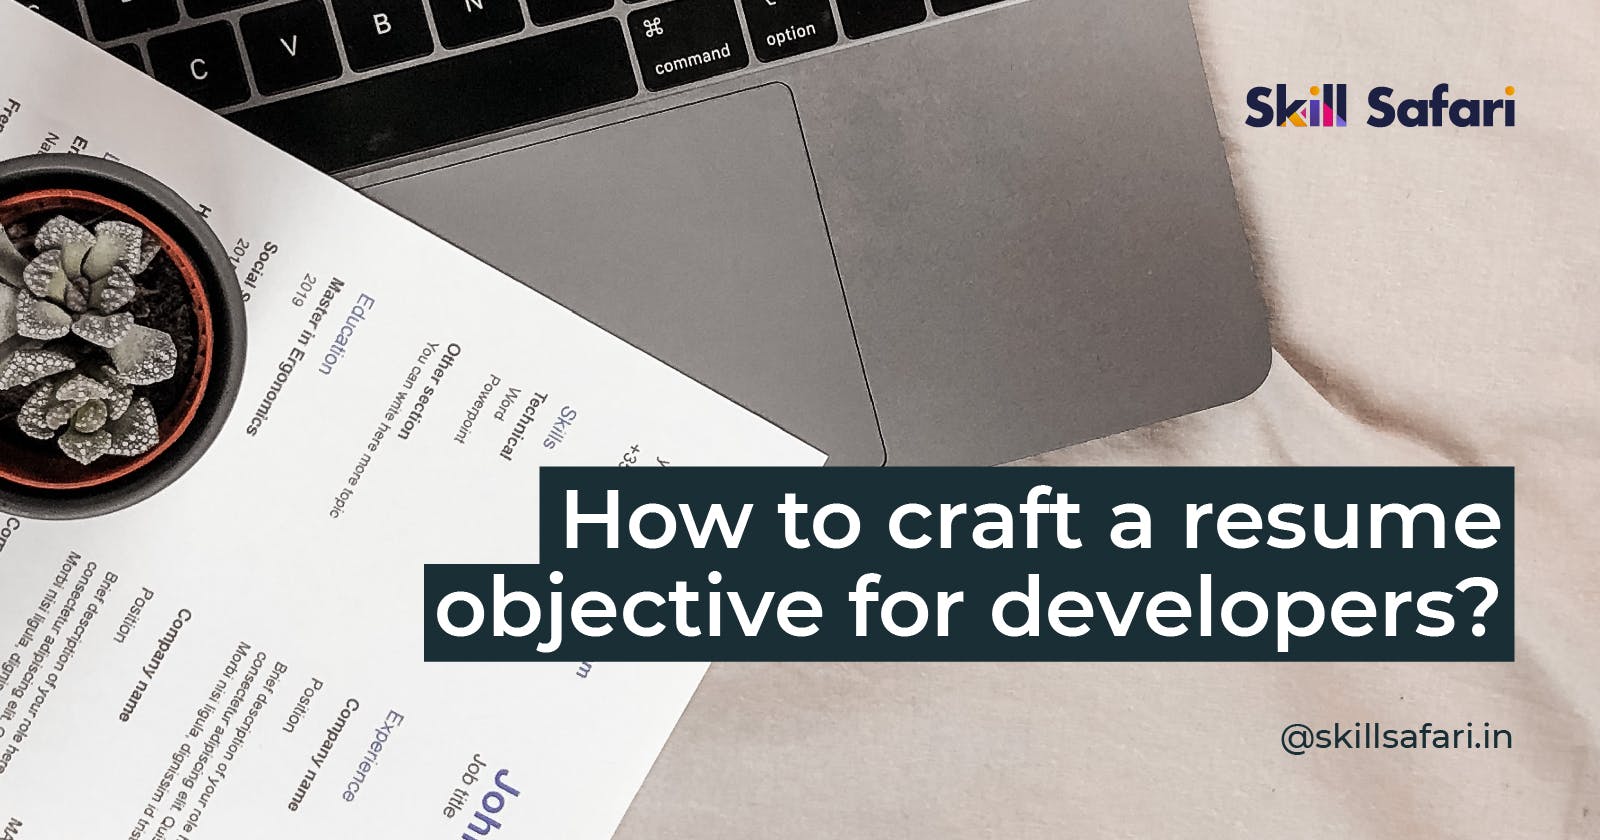 How to craft a resume objective for developers?